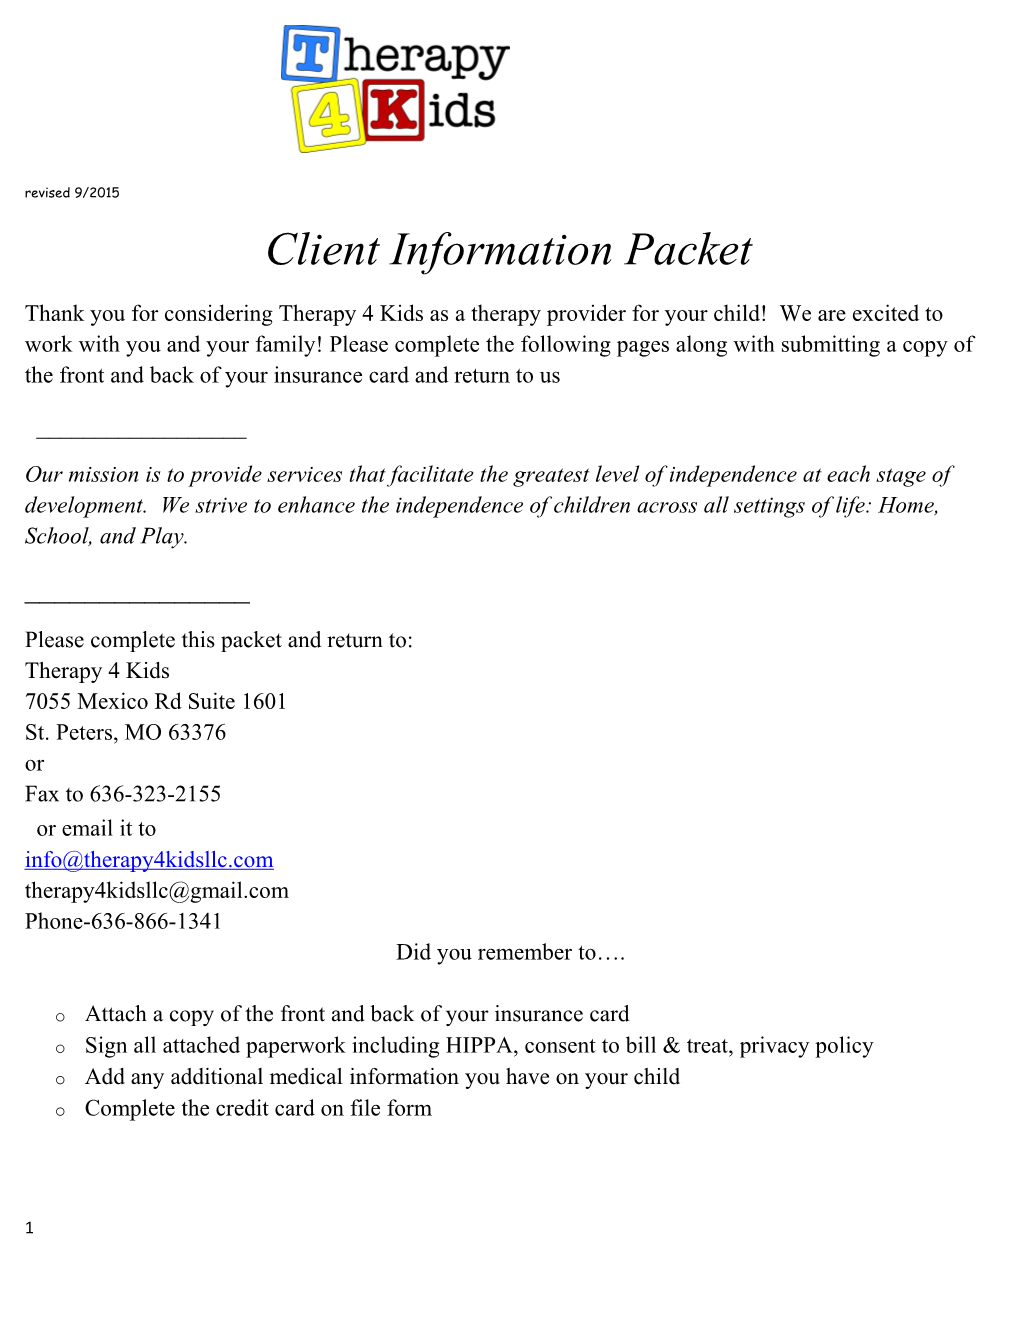 Client Information Packet